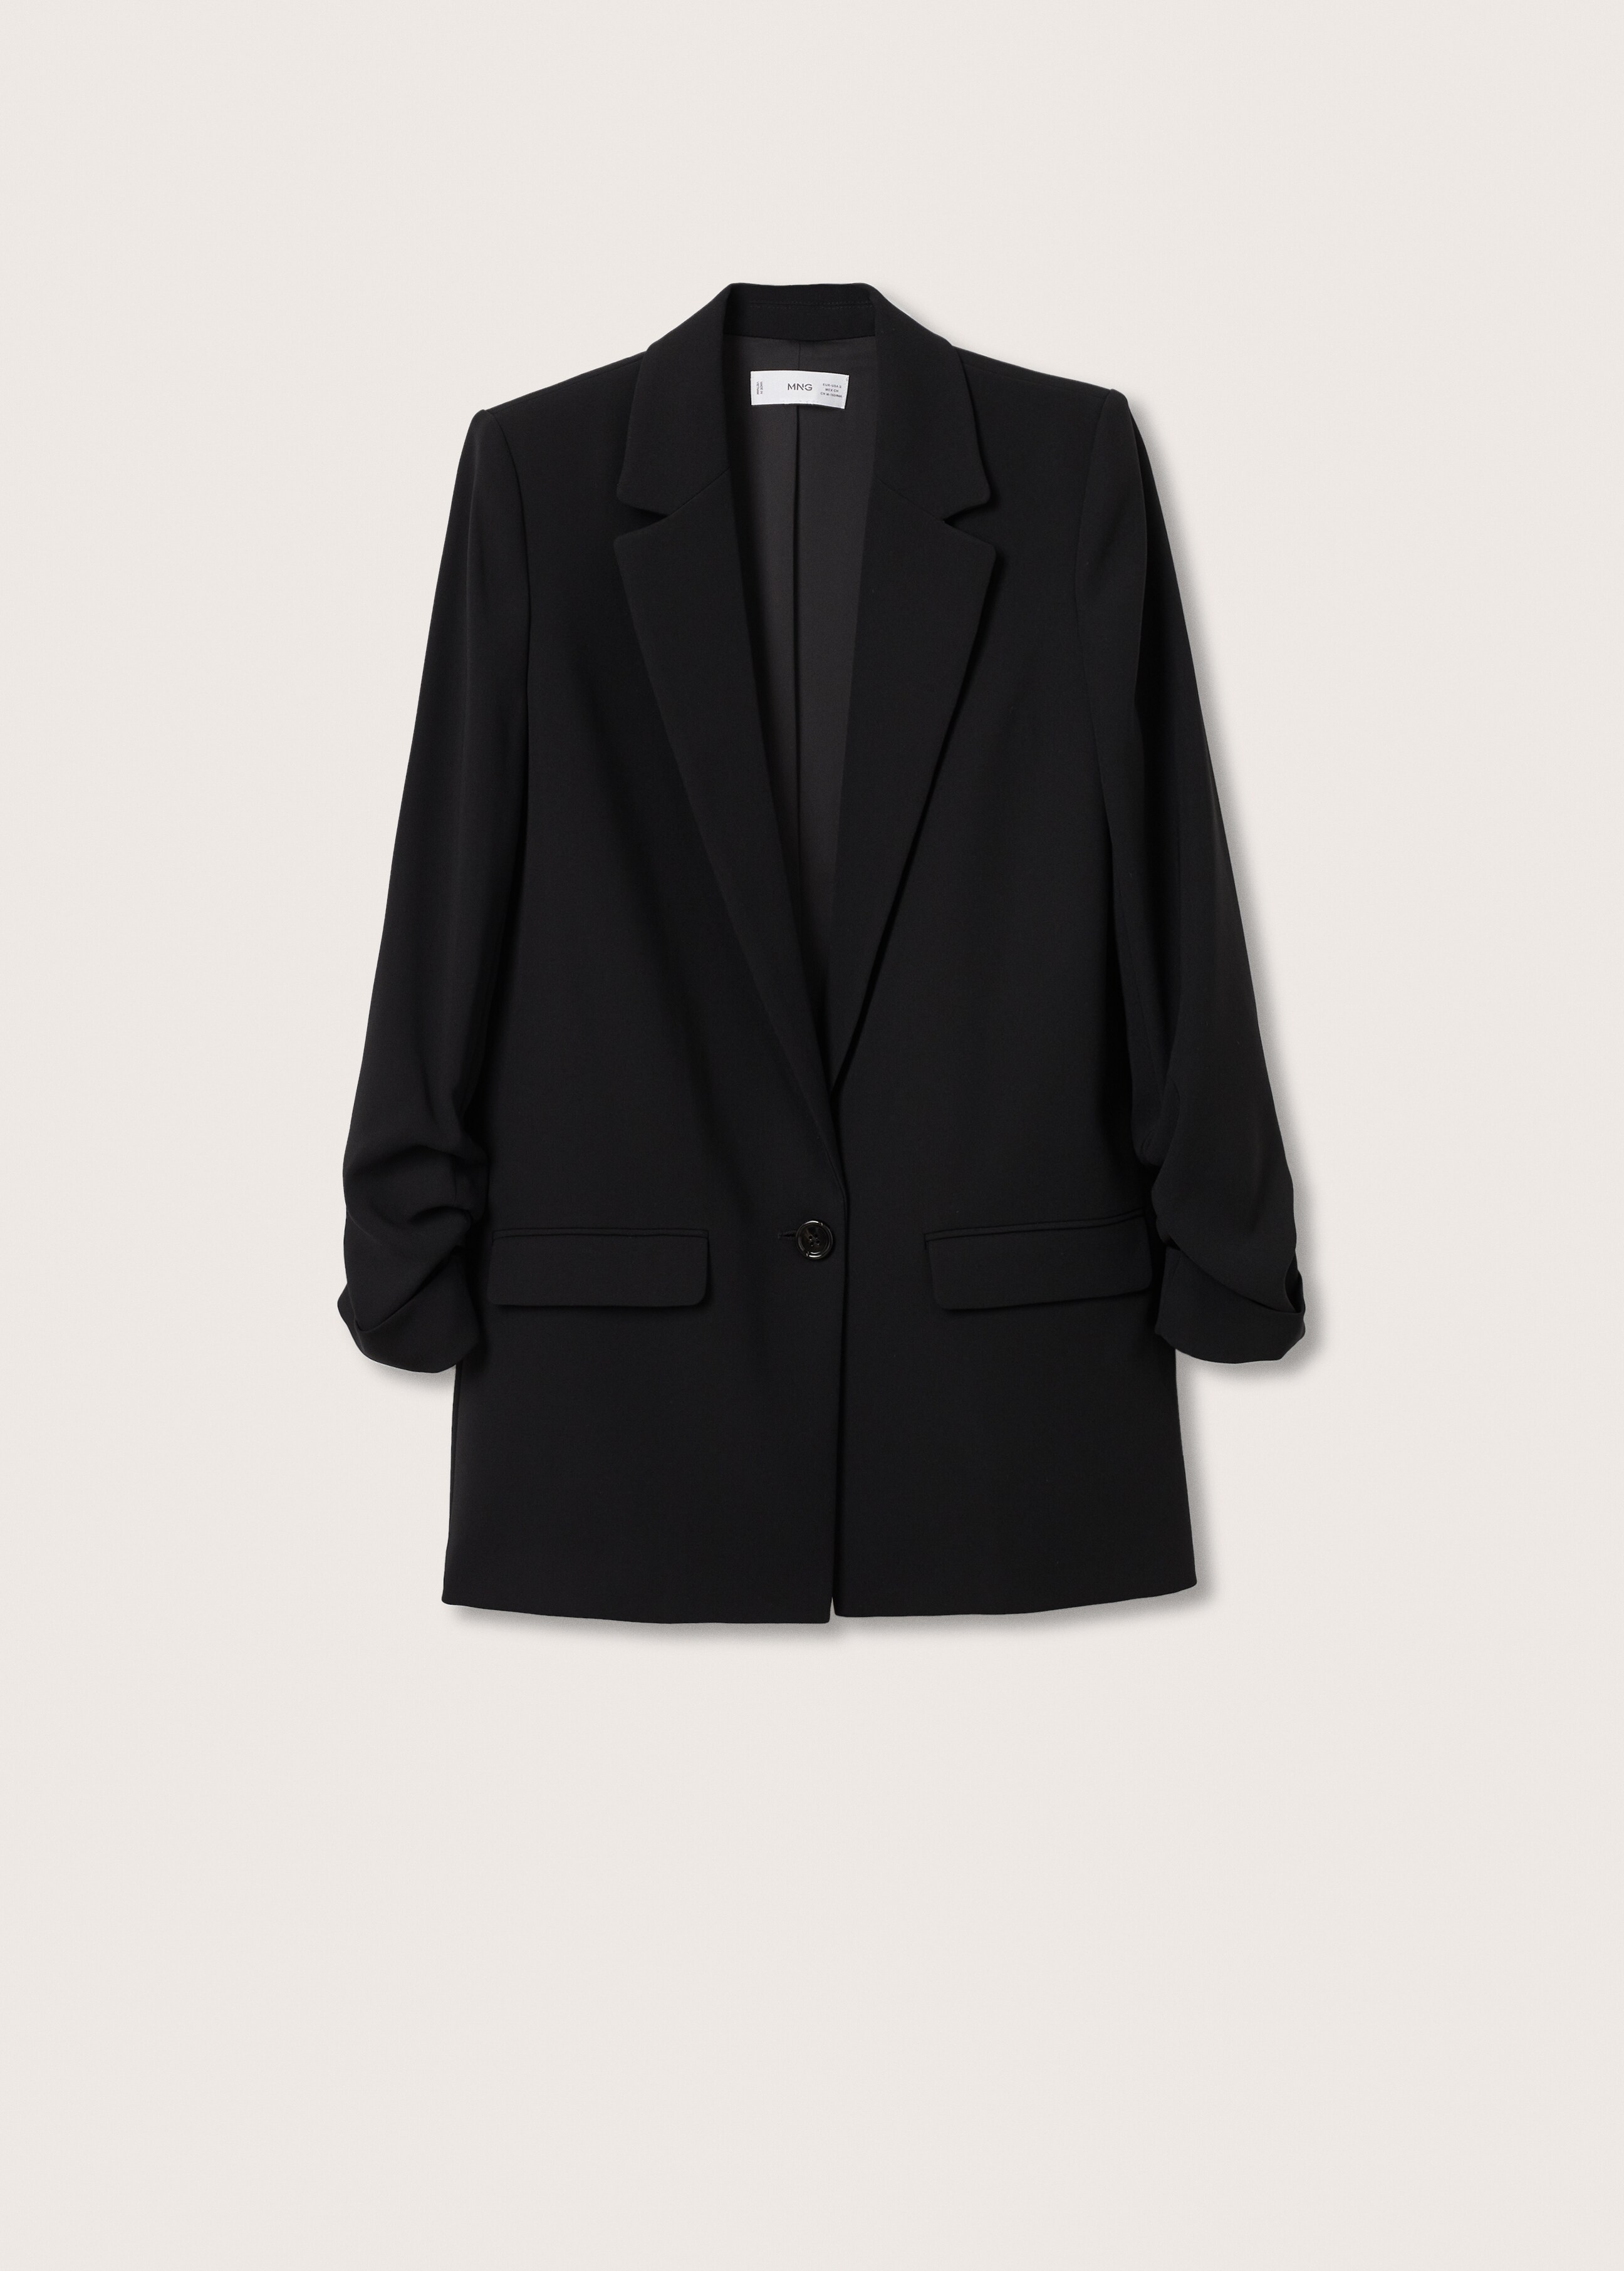 Flowy suit blazer - Article without model